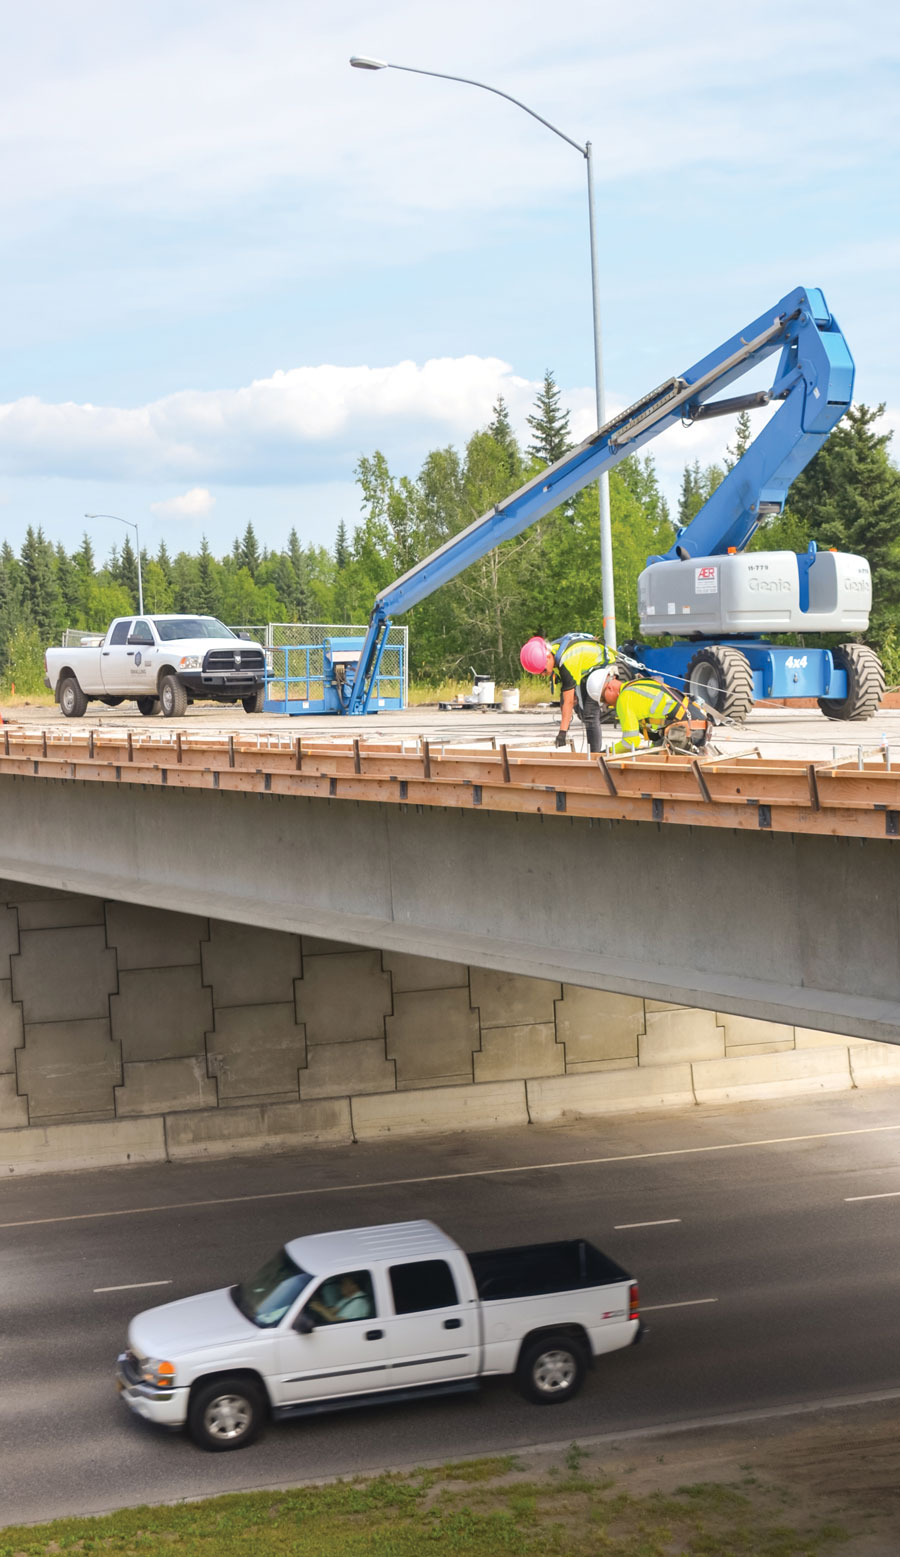 Excellence in Construction Award for a Specialty Contractor — Transportation, Marine, Heavy, Earthmoving; Contractor: Swalling General Contractors, LLC; Project: Parks Highway Milepost 356-362 Bridges